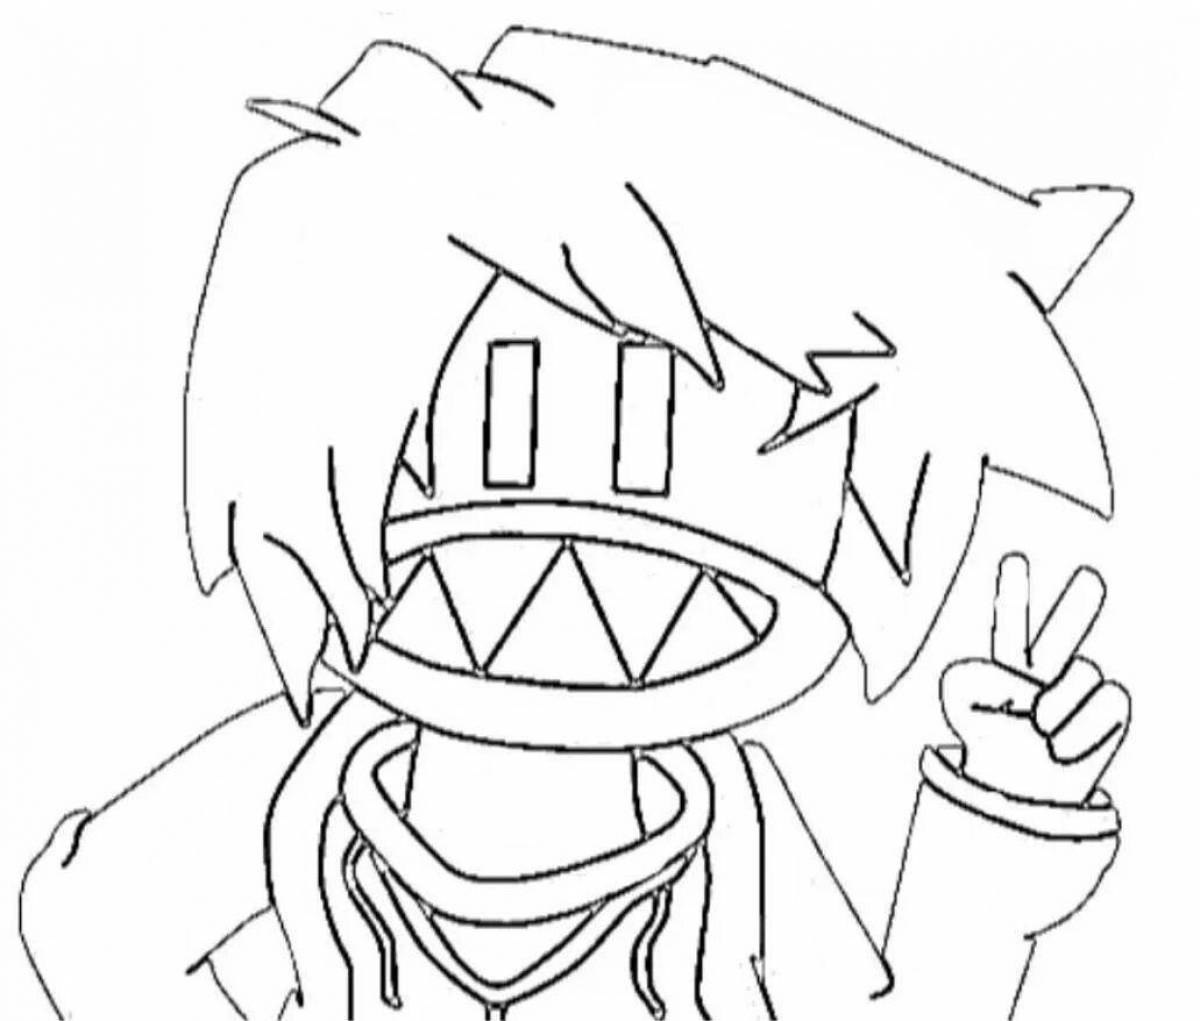 Adorable roblox monster coloring page